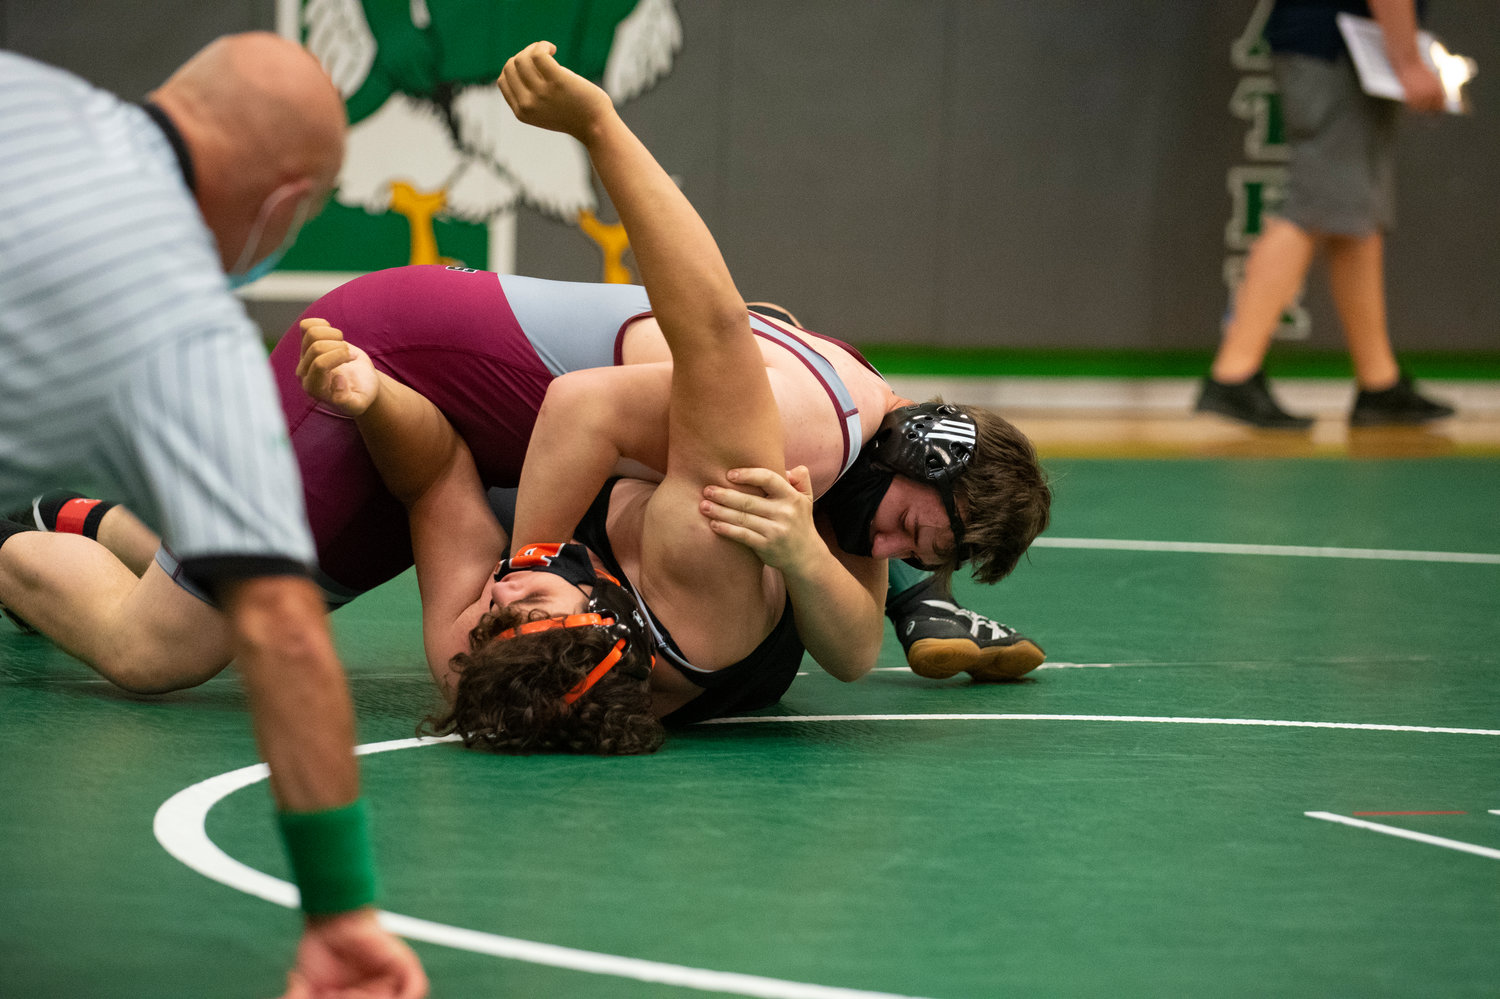 W.F. West's Andrew Penland pins a Washougal opponent in the first round of his first match at the 2A District 4 Tournament at Tumwater on Tuesday.